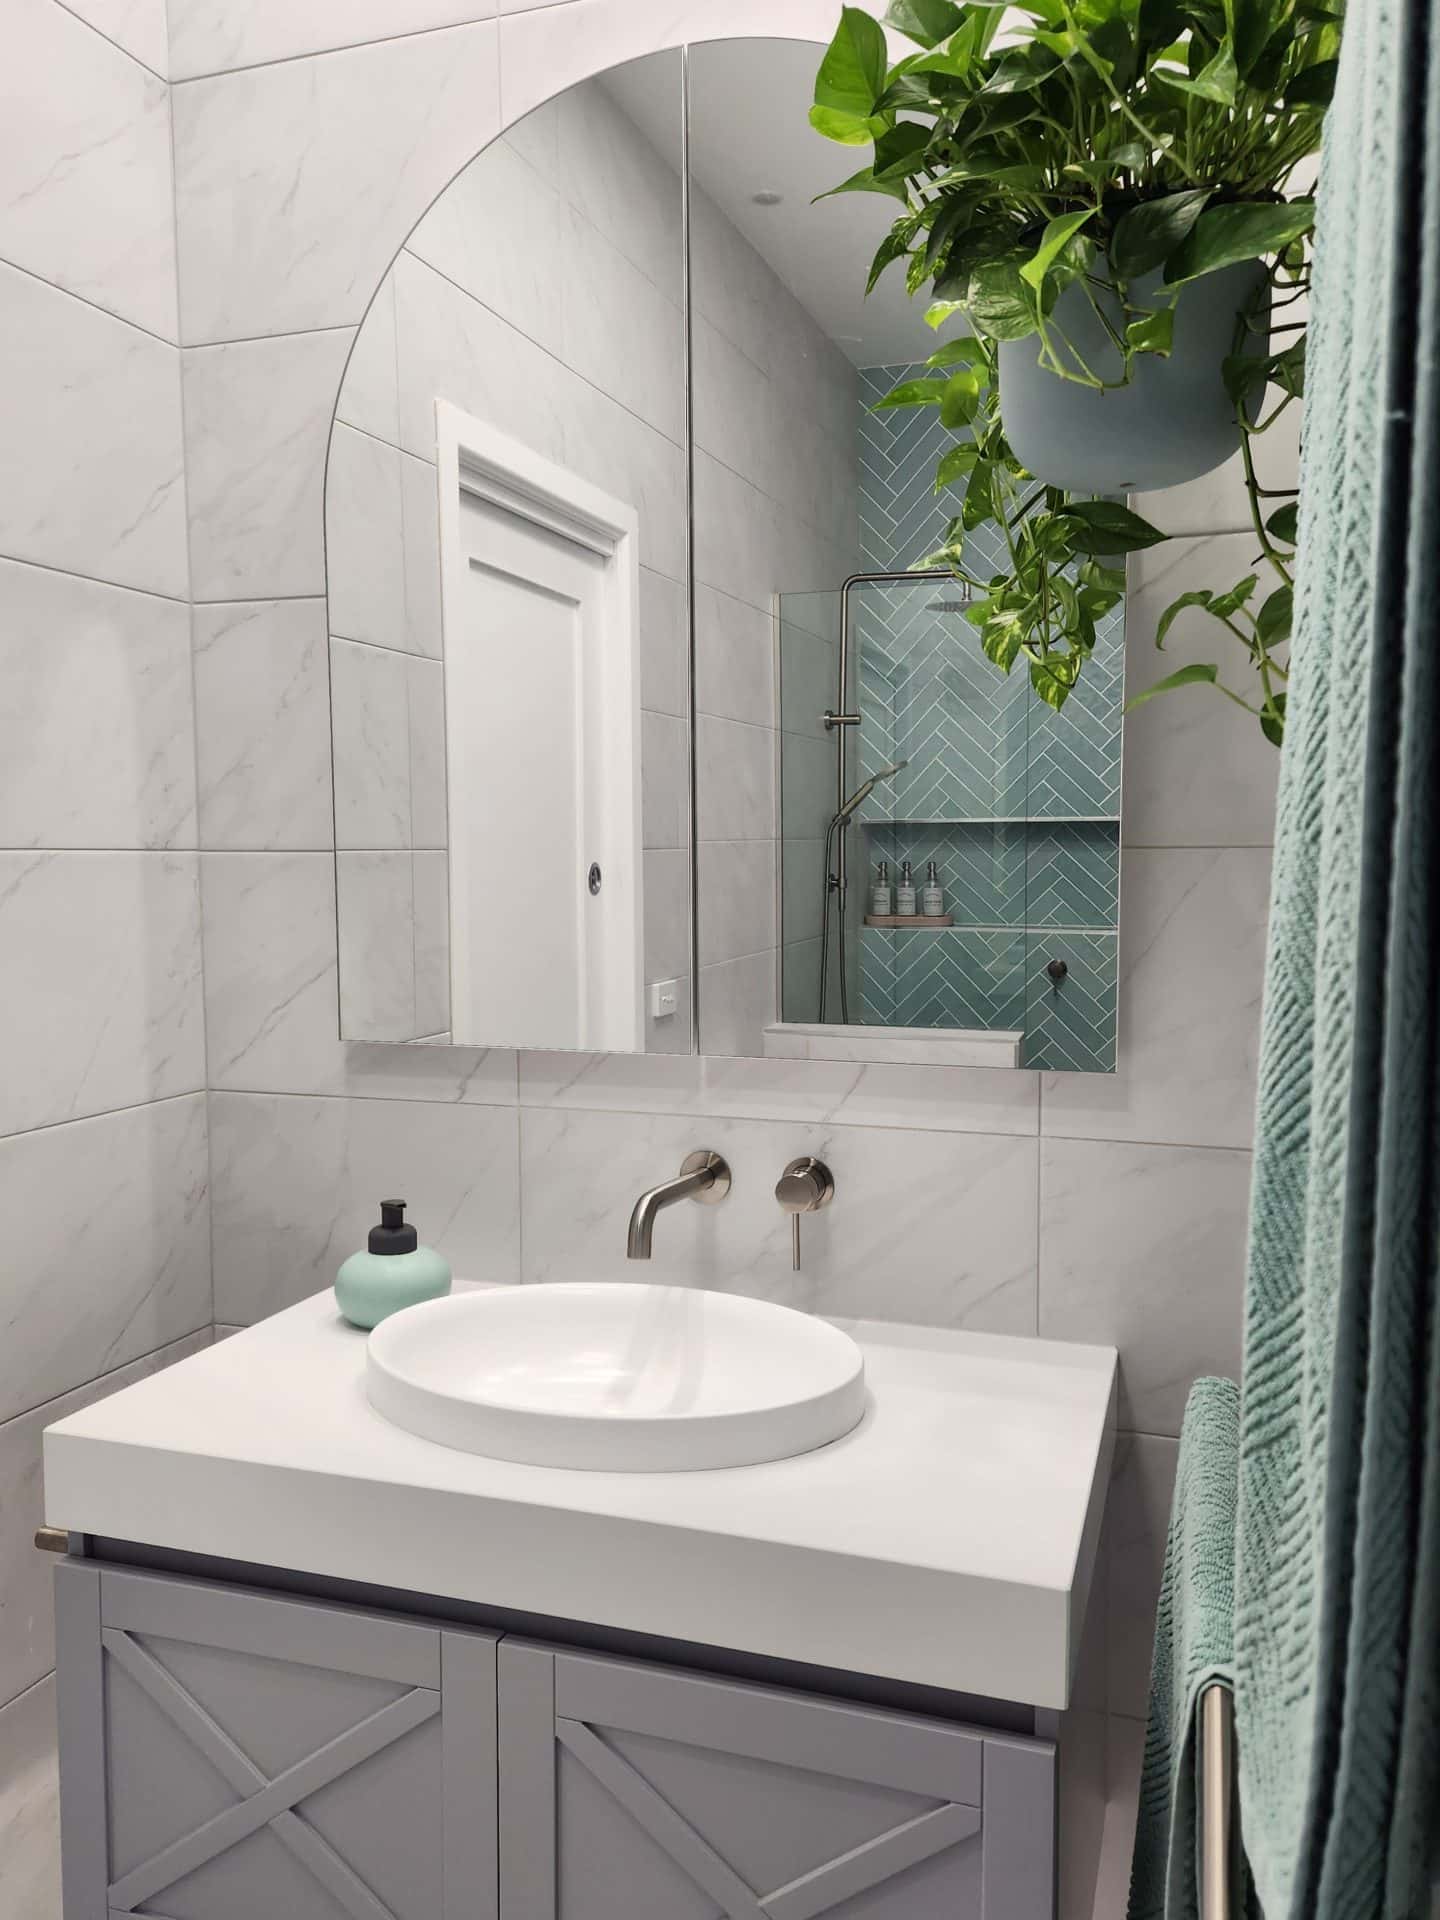 a modern bathroom with a plant hanging on the wall.